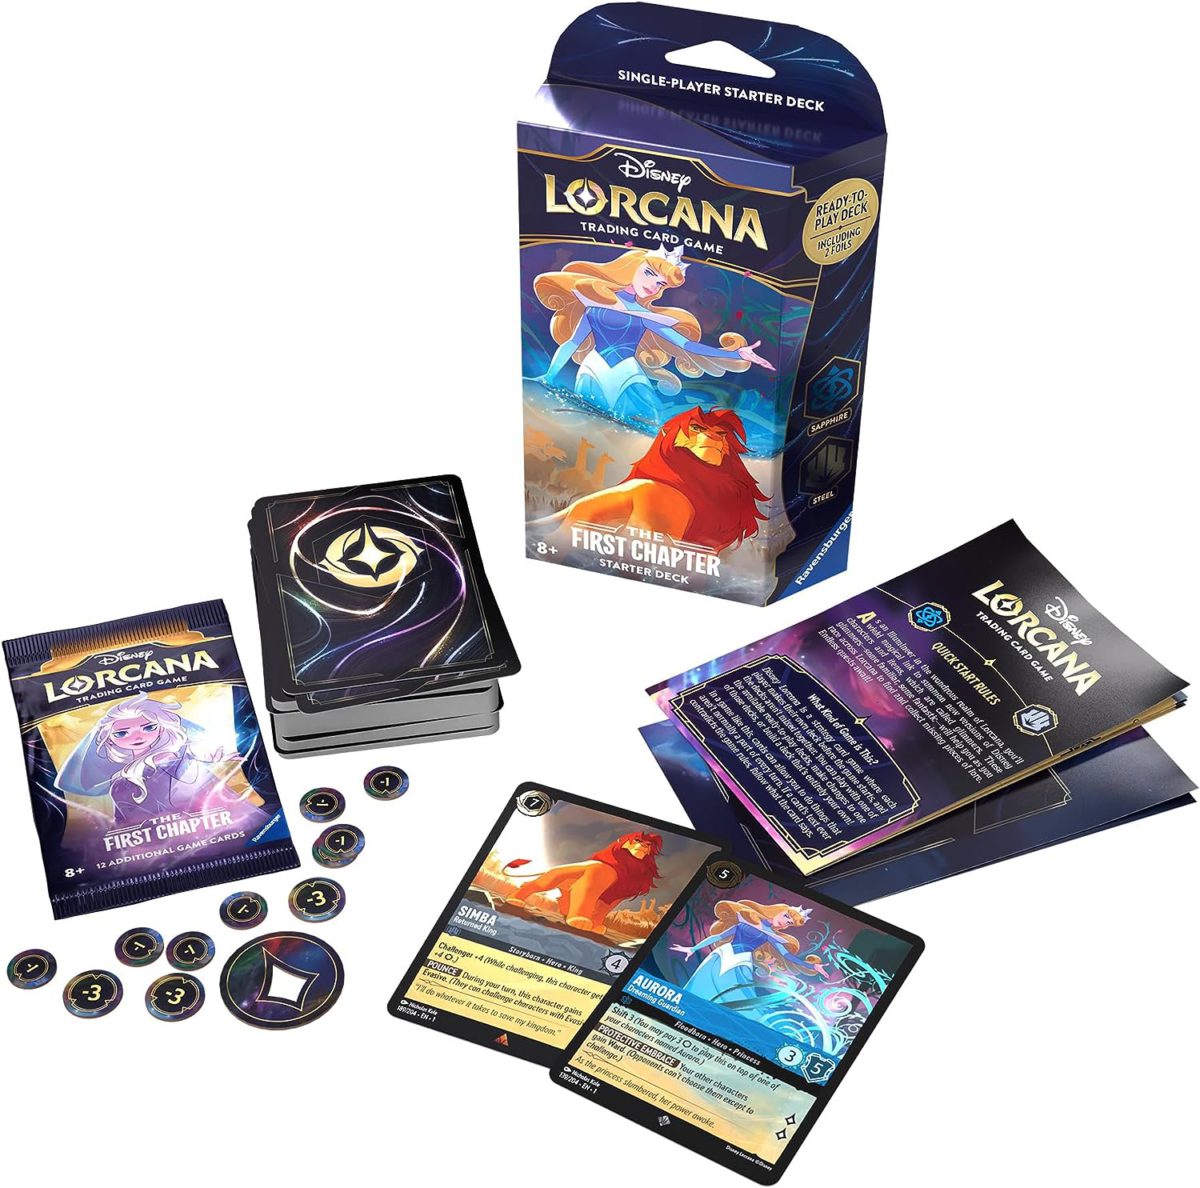 New Disney Lorcana Starter Sets Are Up for Preorder at Amazon